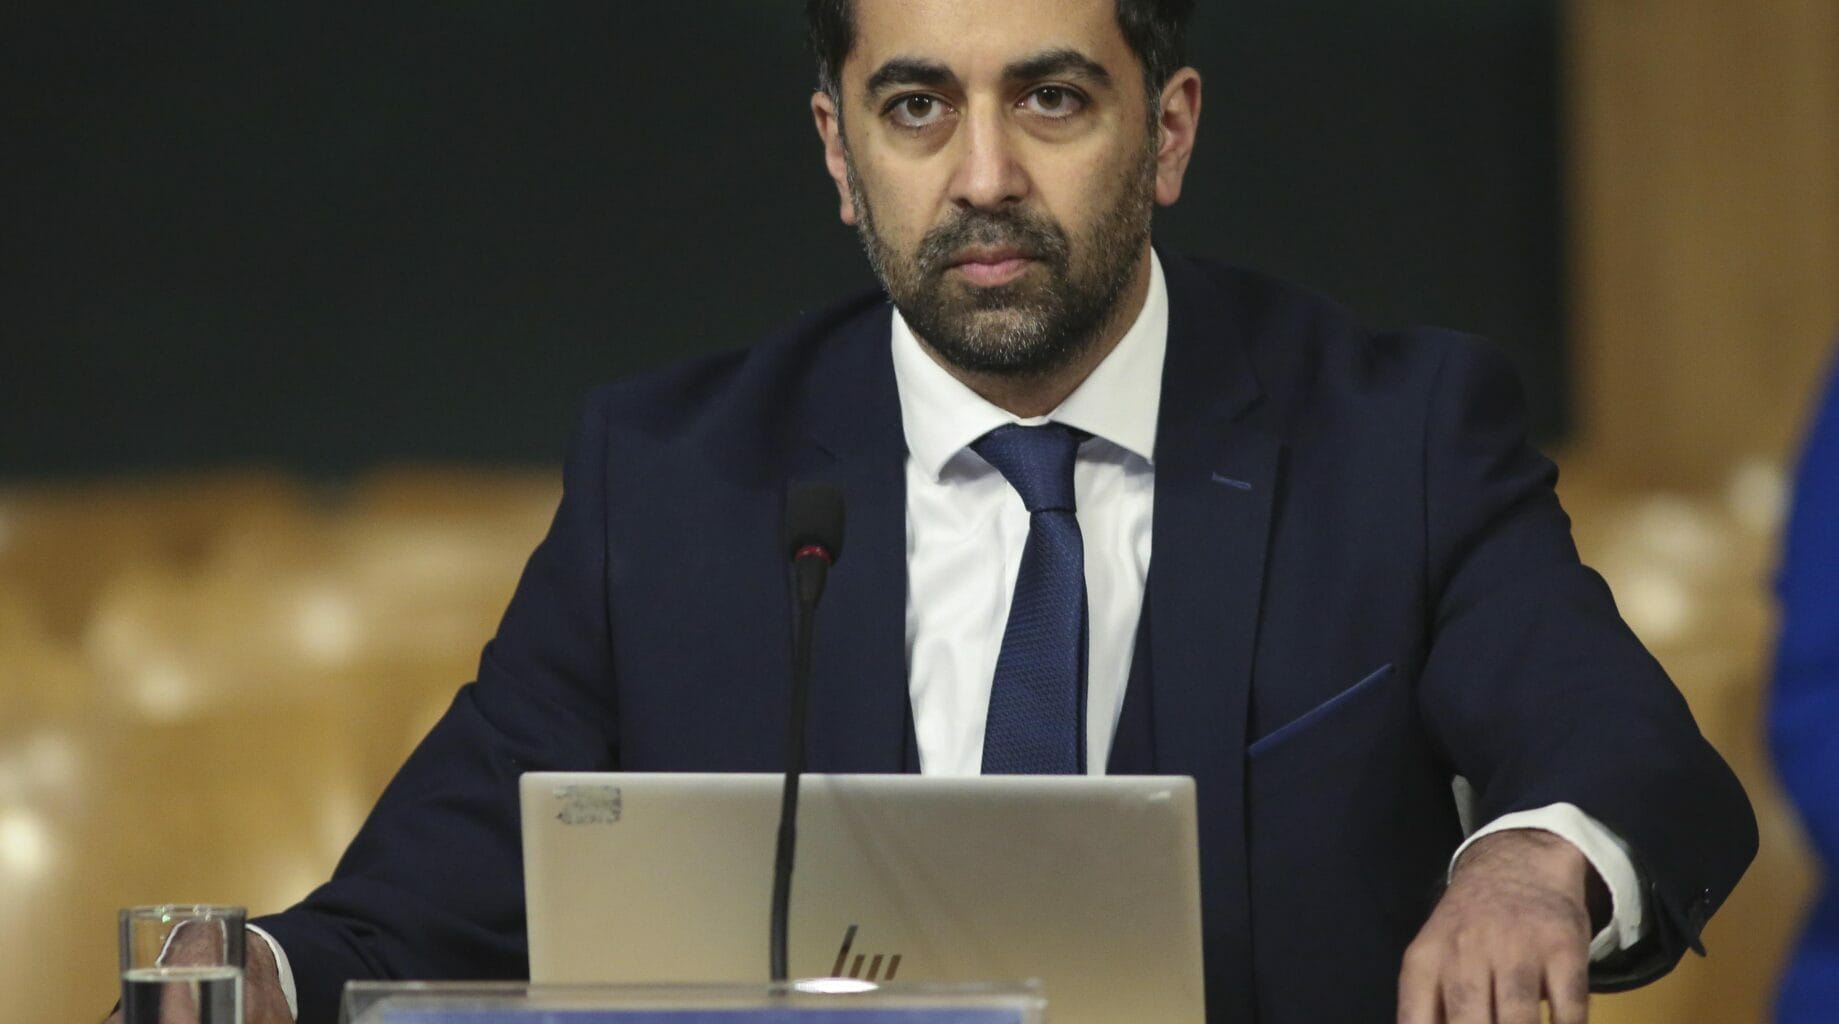 Humza Yousaf, Scottish first minister